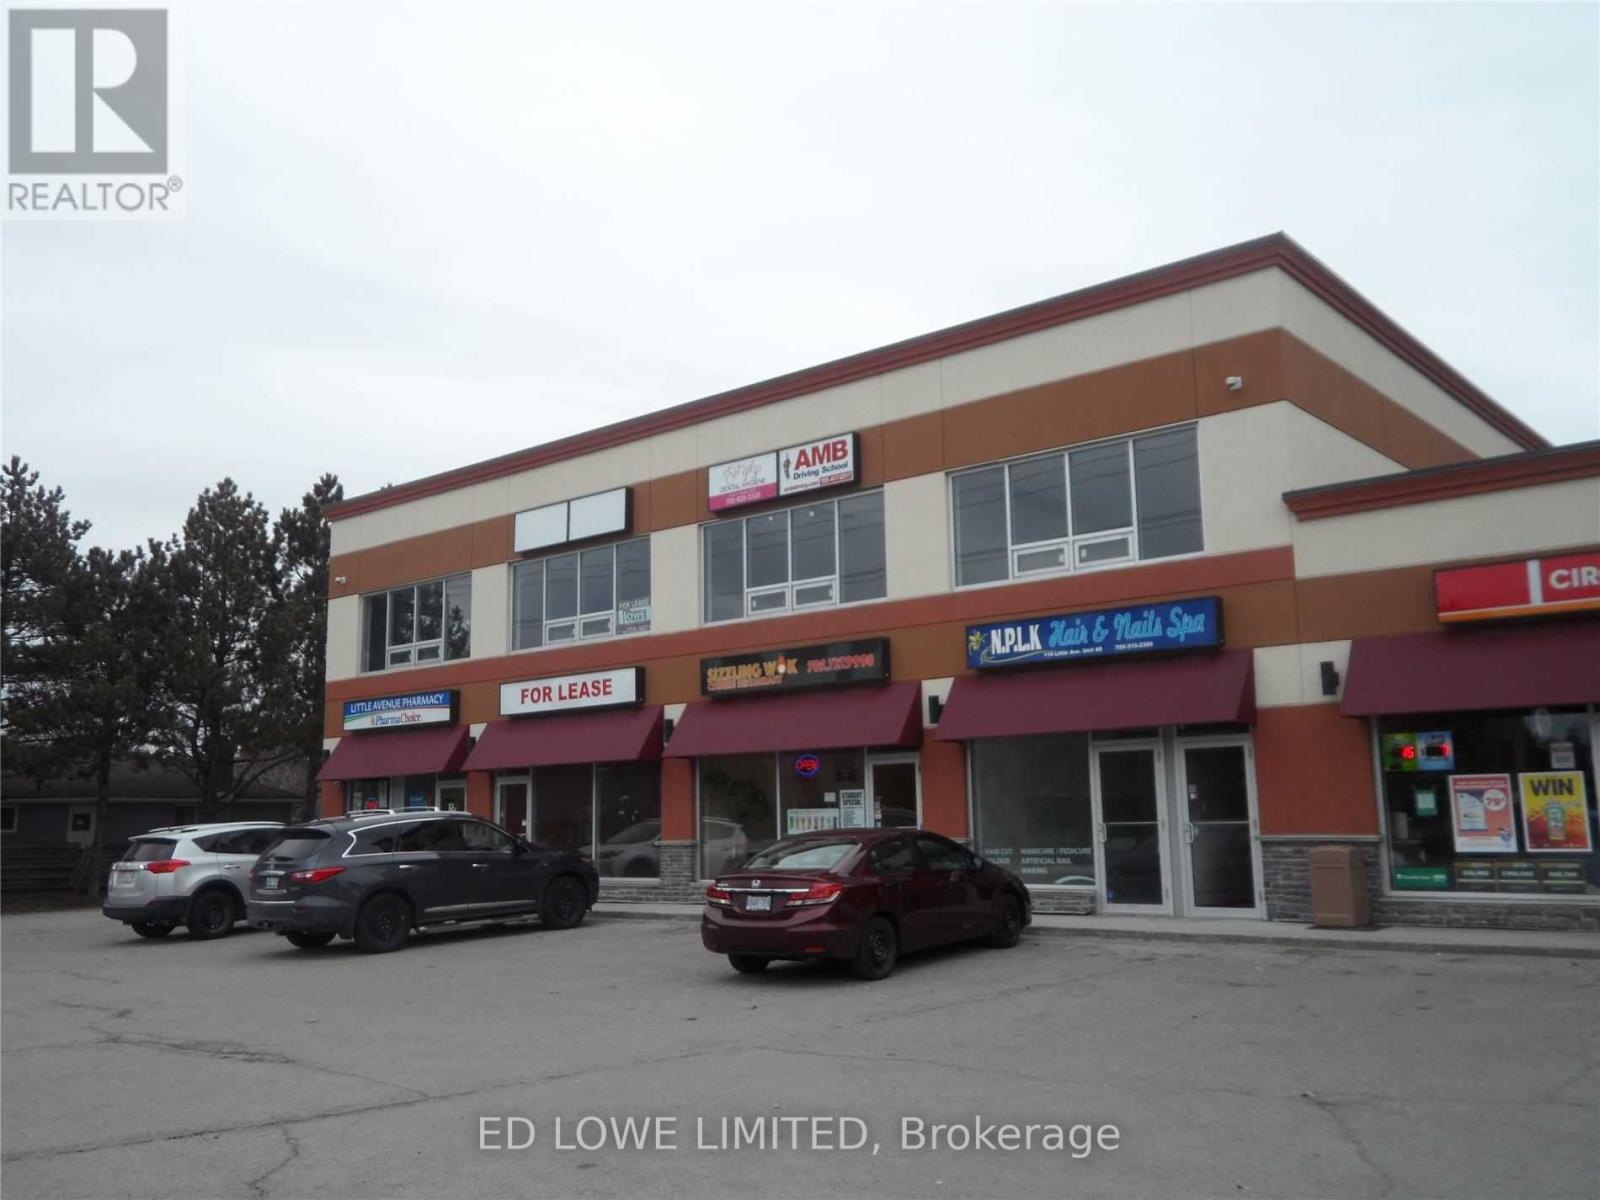 ## B -110 LITTLE AVE located in Barrie, Ontario